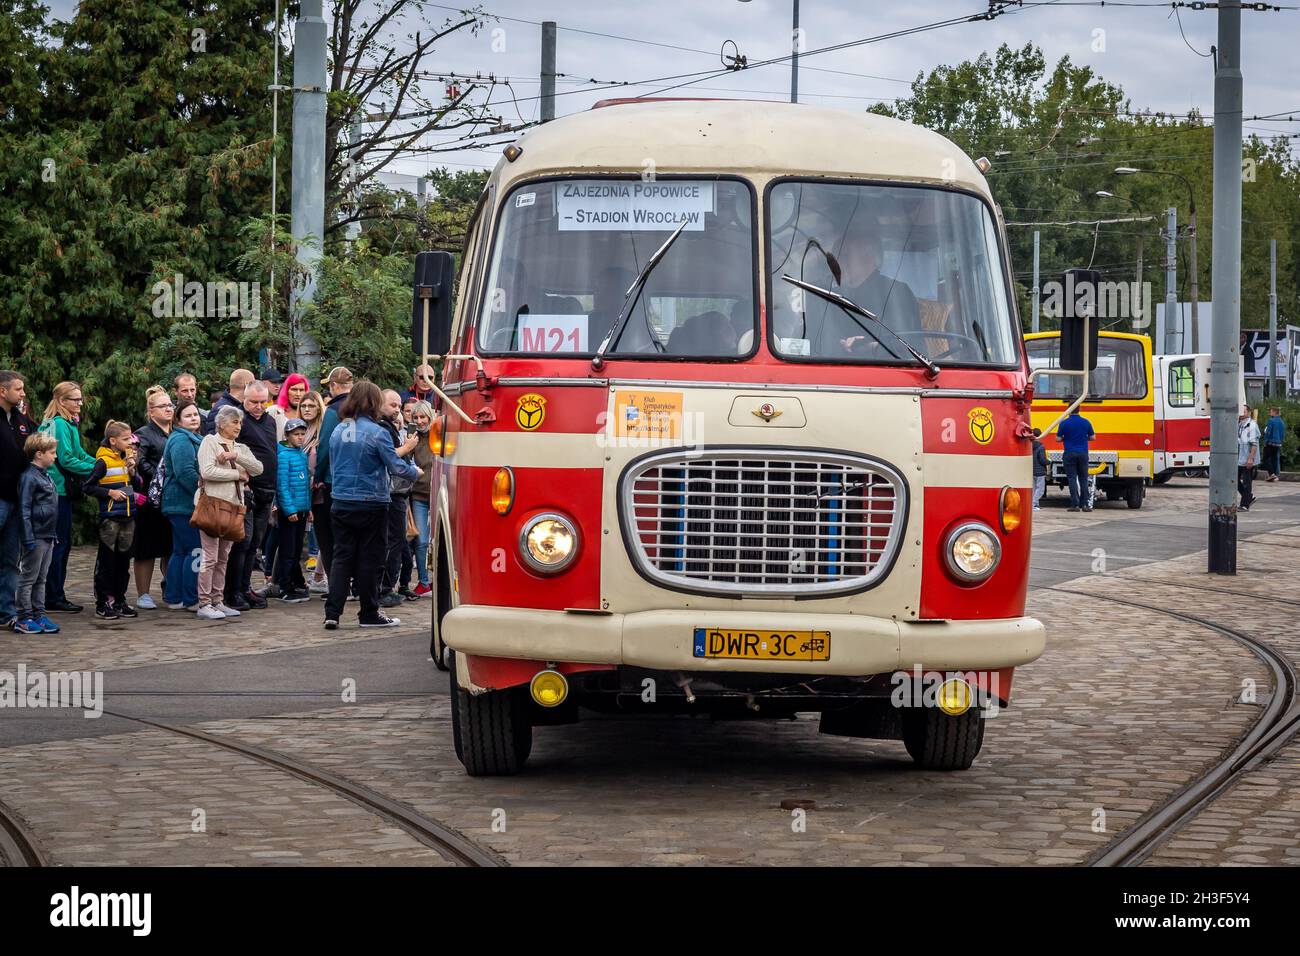 Wroclaw, Poland - September 19, 2021: A queue of passengers getting into a vintage red and cream Skoda bus at the bus station. Stock Photo